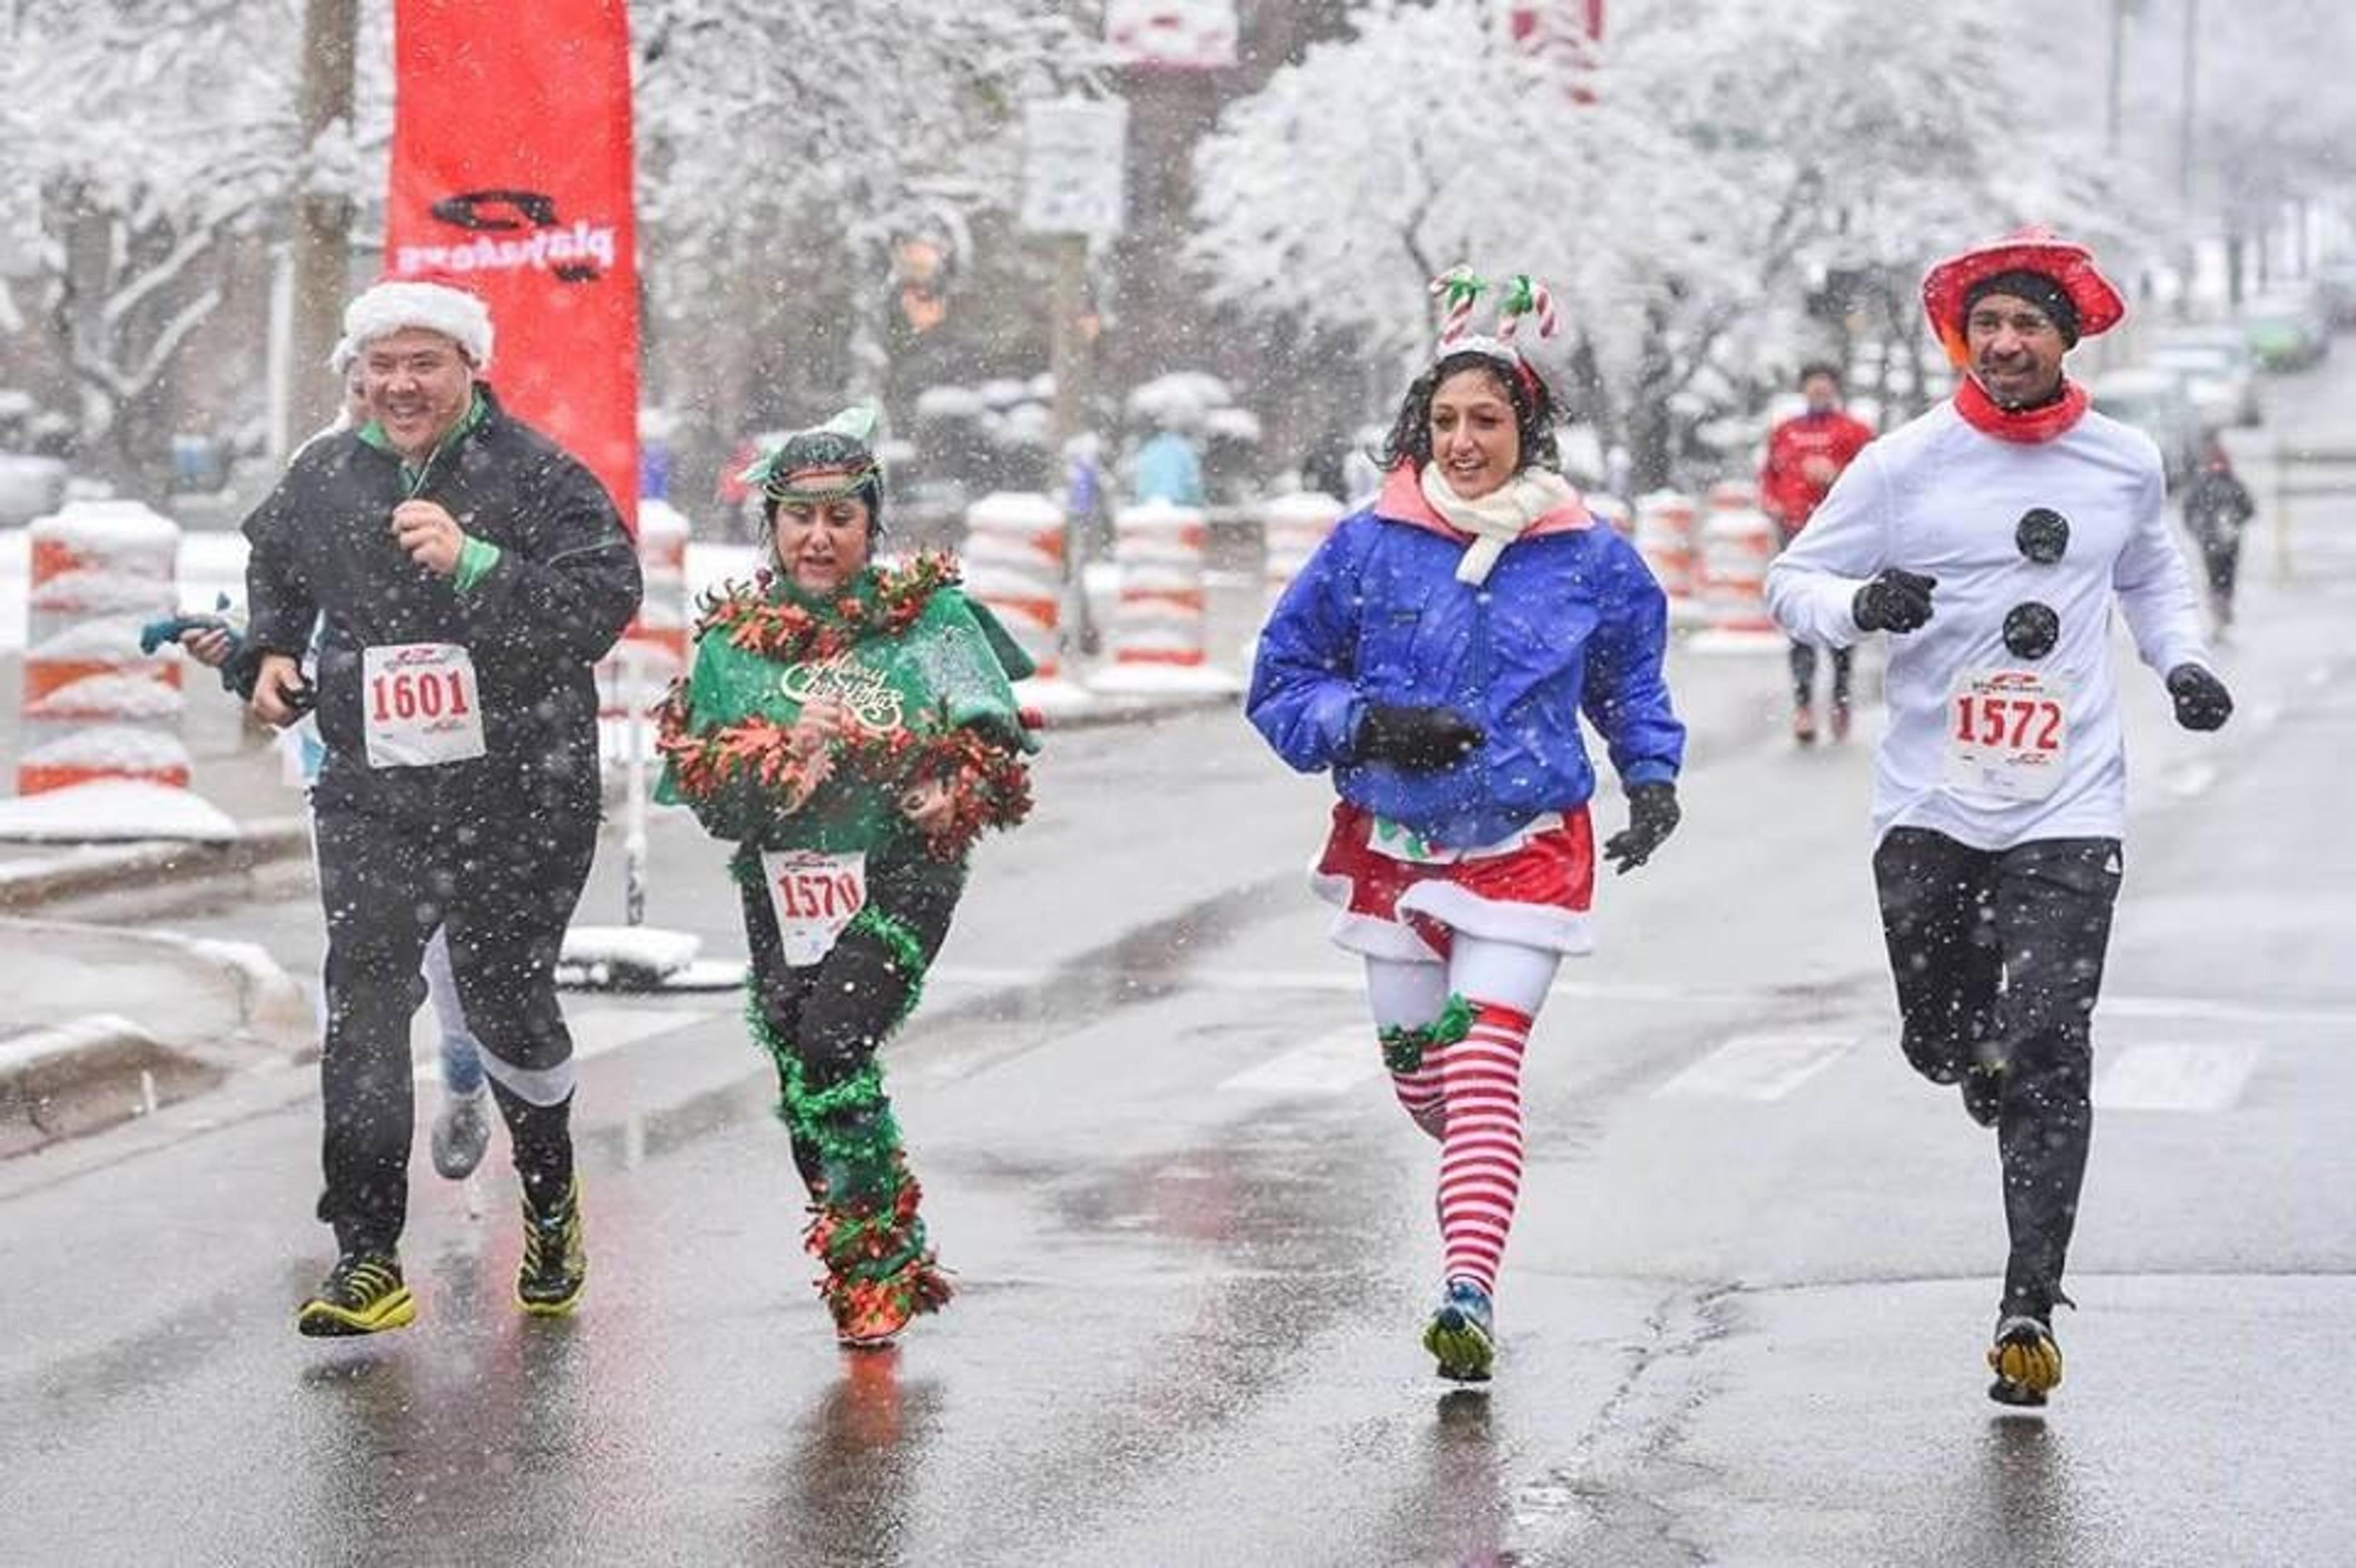 Runners wearing holiday-themed costumes take part in last year's Silver Bells 5K Run.